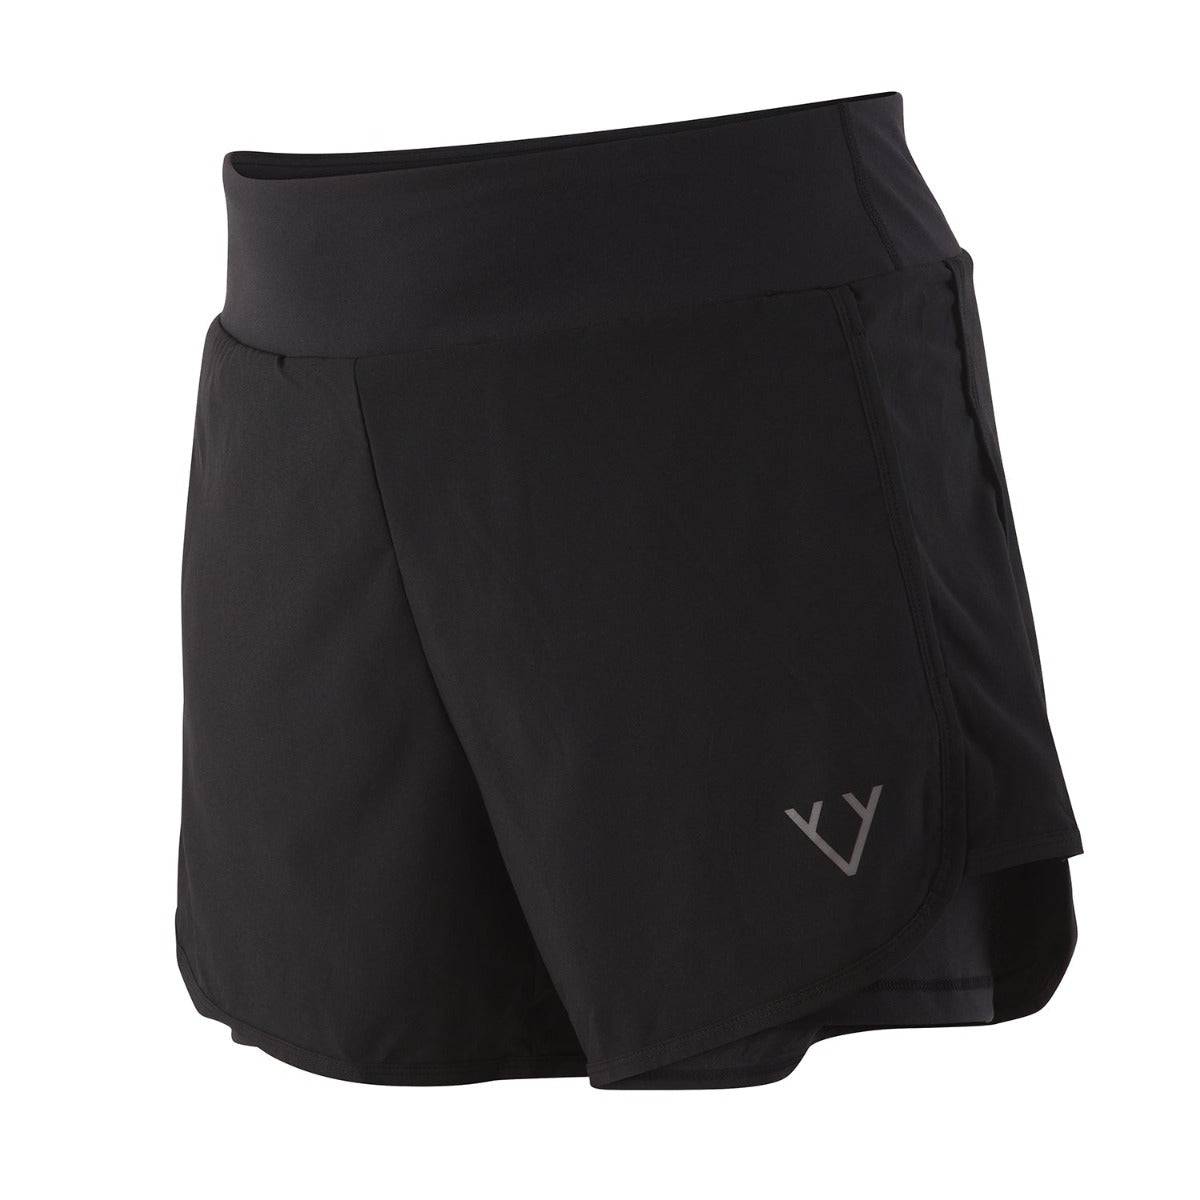 Victoria Stag's Core Running Shorts